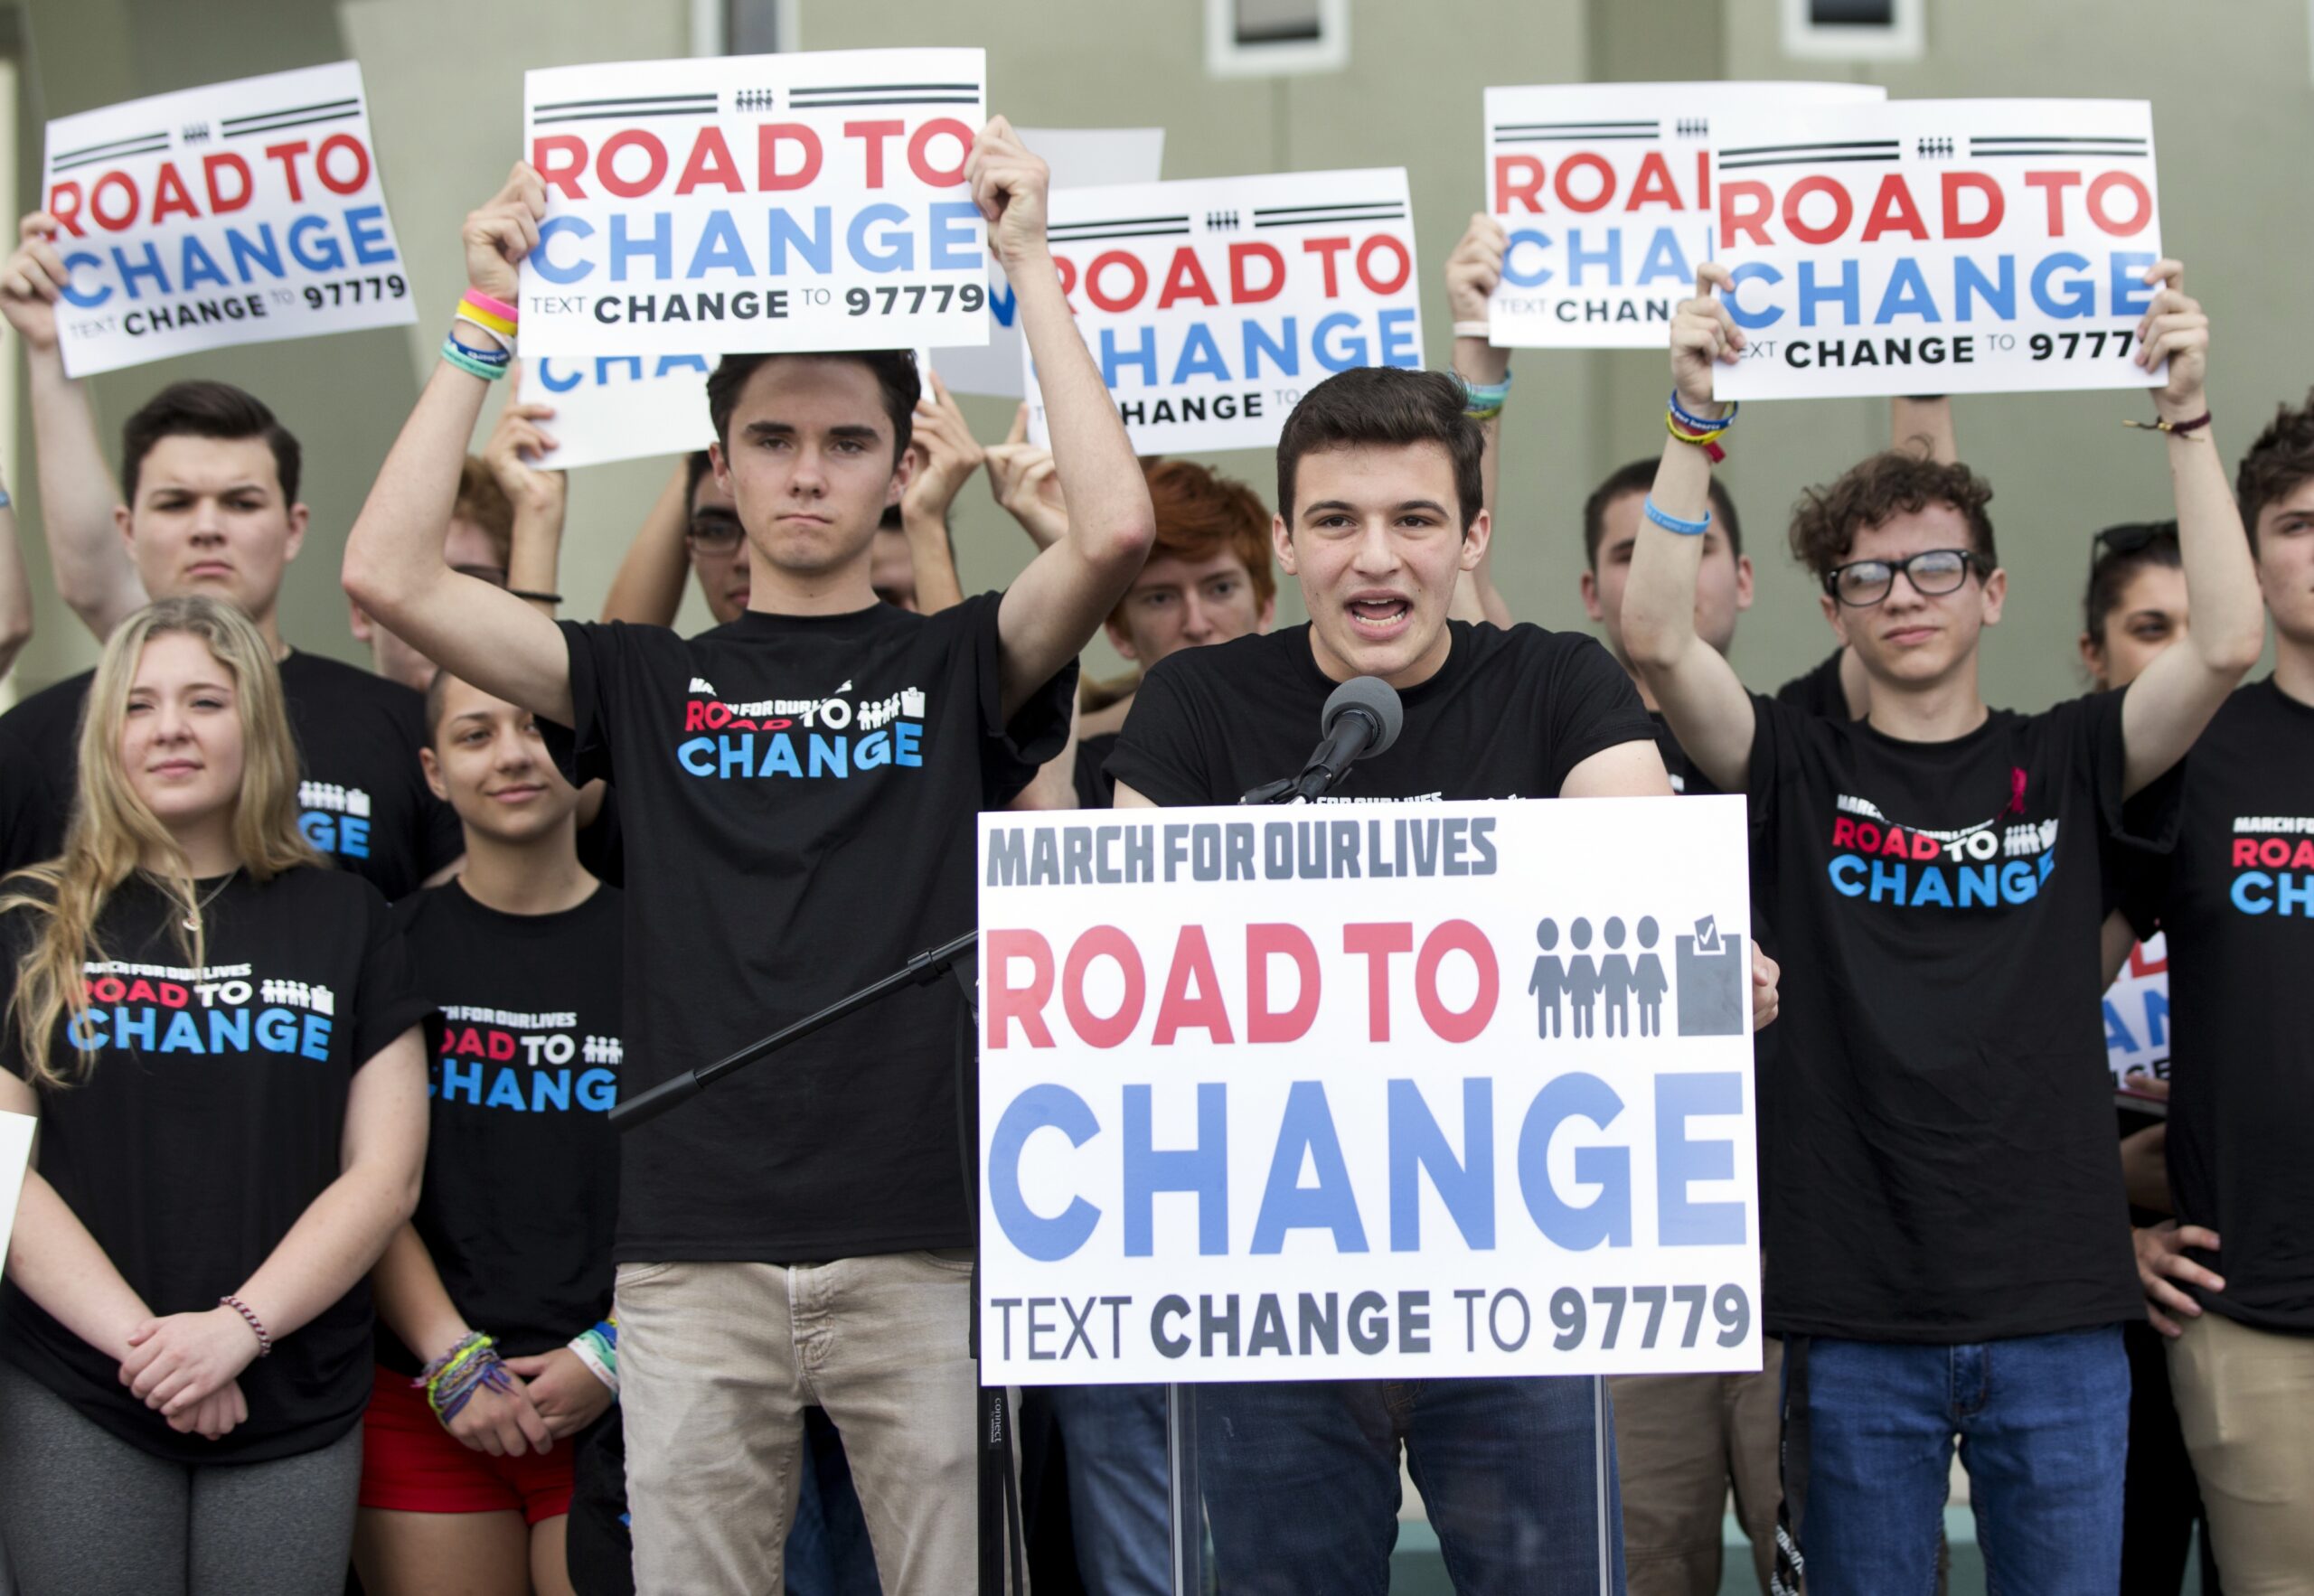 March for Our Lives: Road to Change